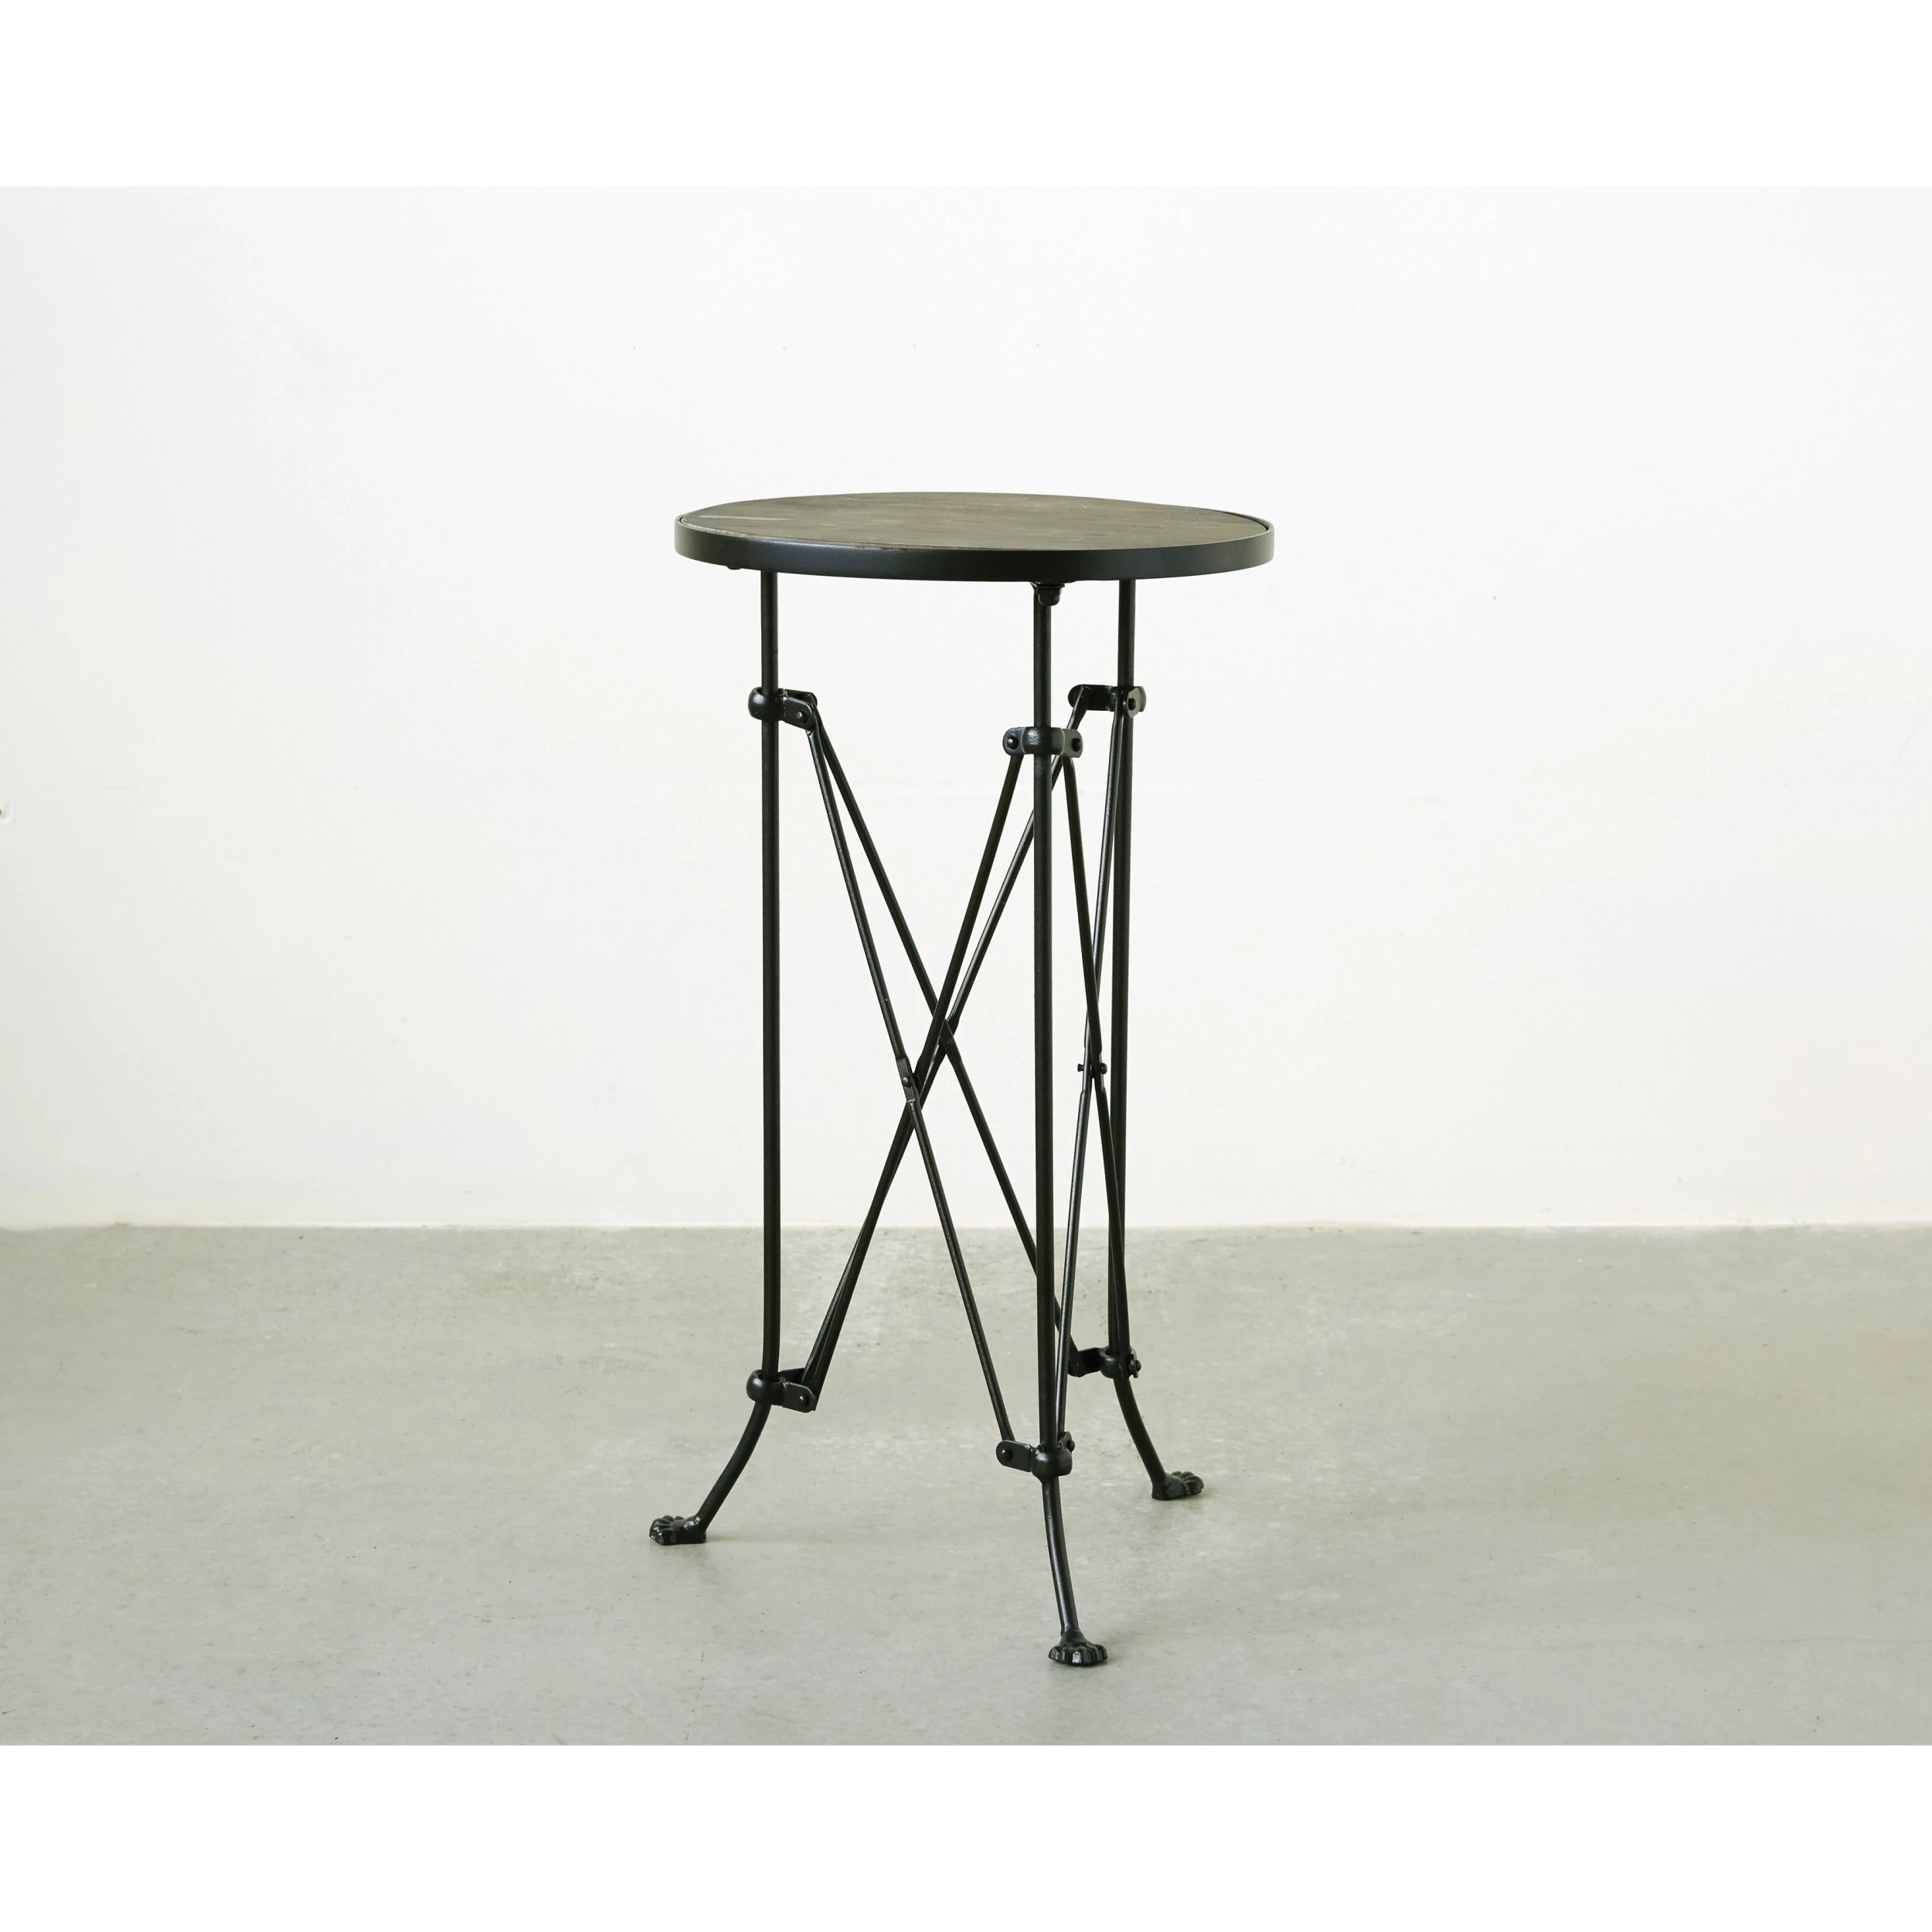 Round Pine Wood Accent Table with Metal Frame - Image 1